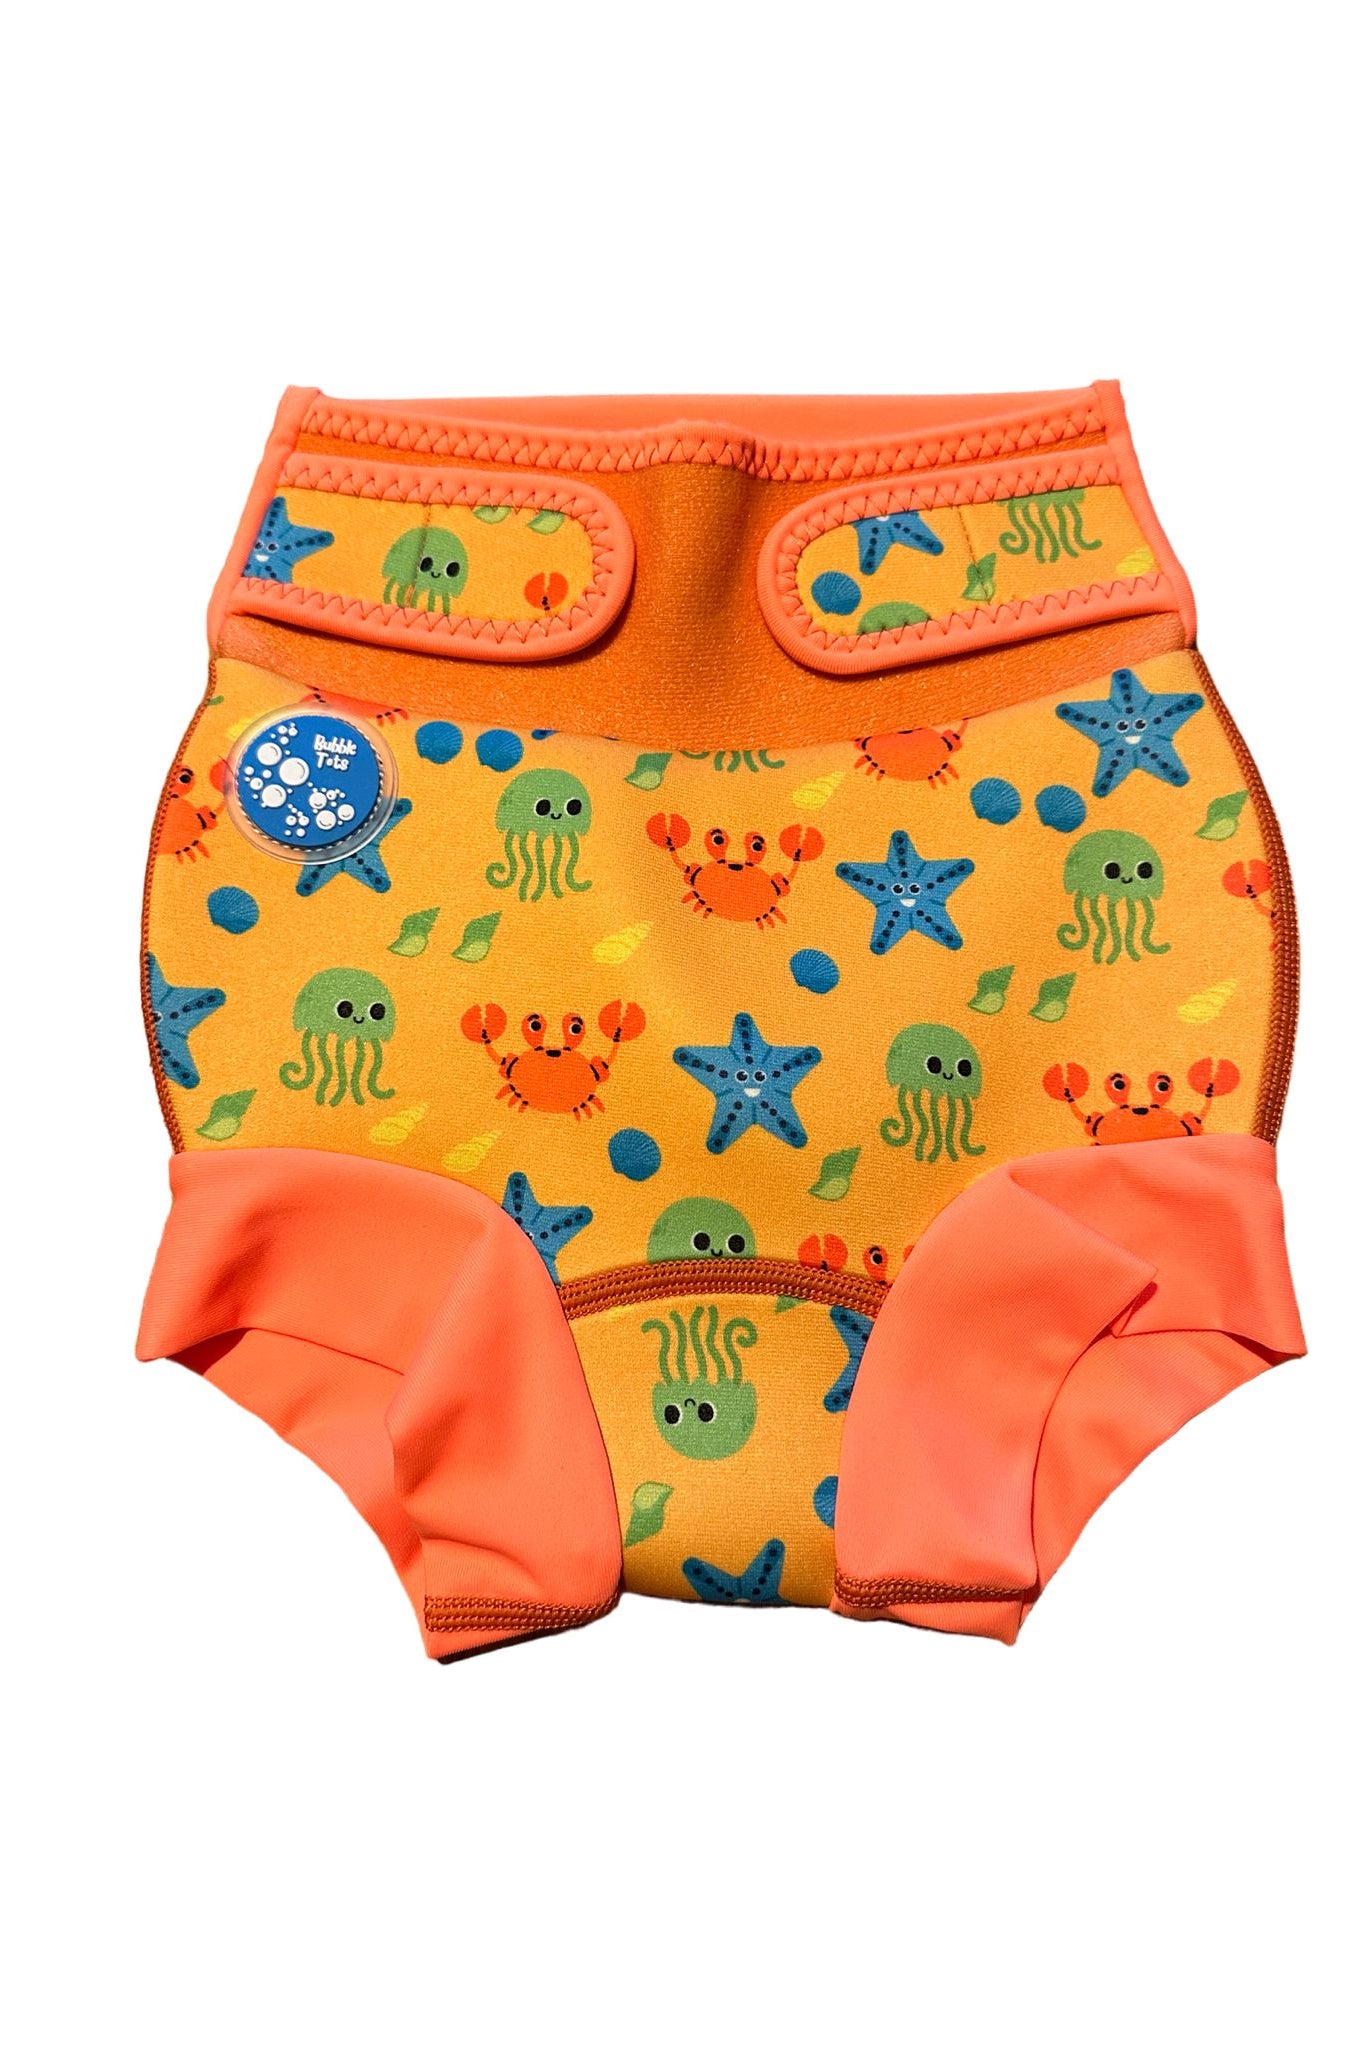 Bubble Tots Go Anywhere Swim Nappy Bright Orange Under The Sea Design An image of the Bubble Tots Go Anywhere Swim Nappy in Orange Under The Sea design. The design features playful Starfish, Jellyfish, Crabs and Shells.. 